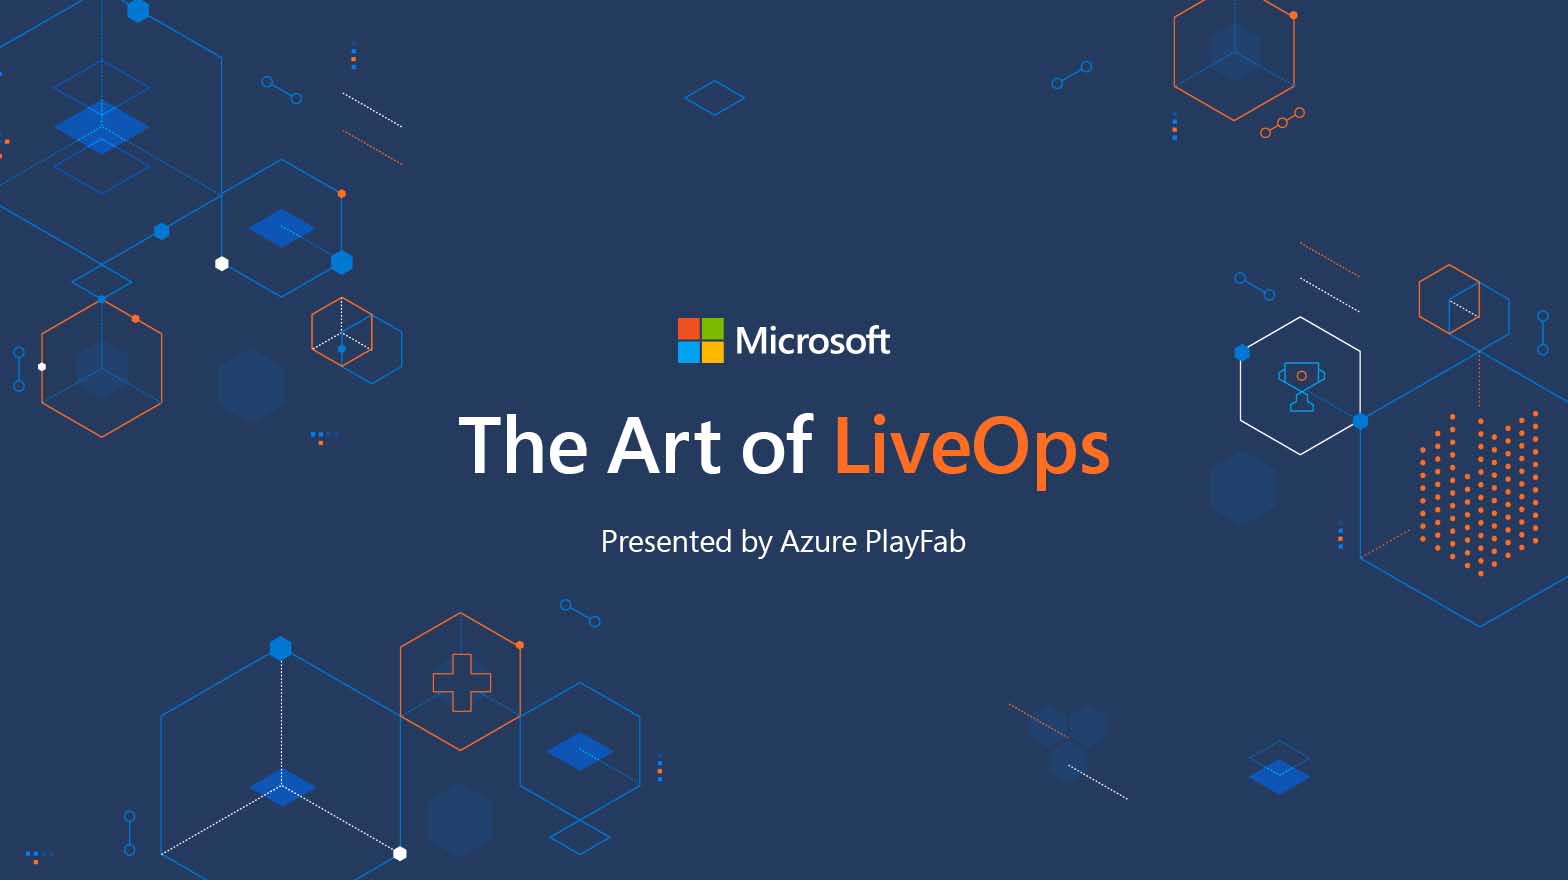 The Art of LiveOps presented by Azure PlayFab